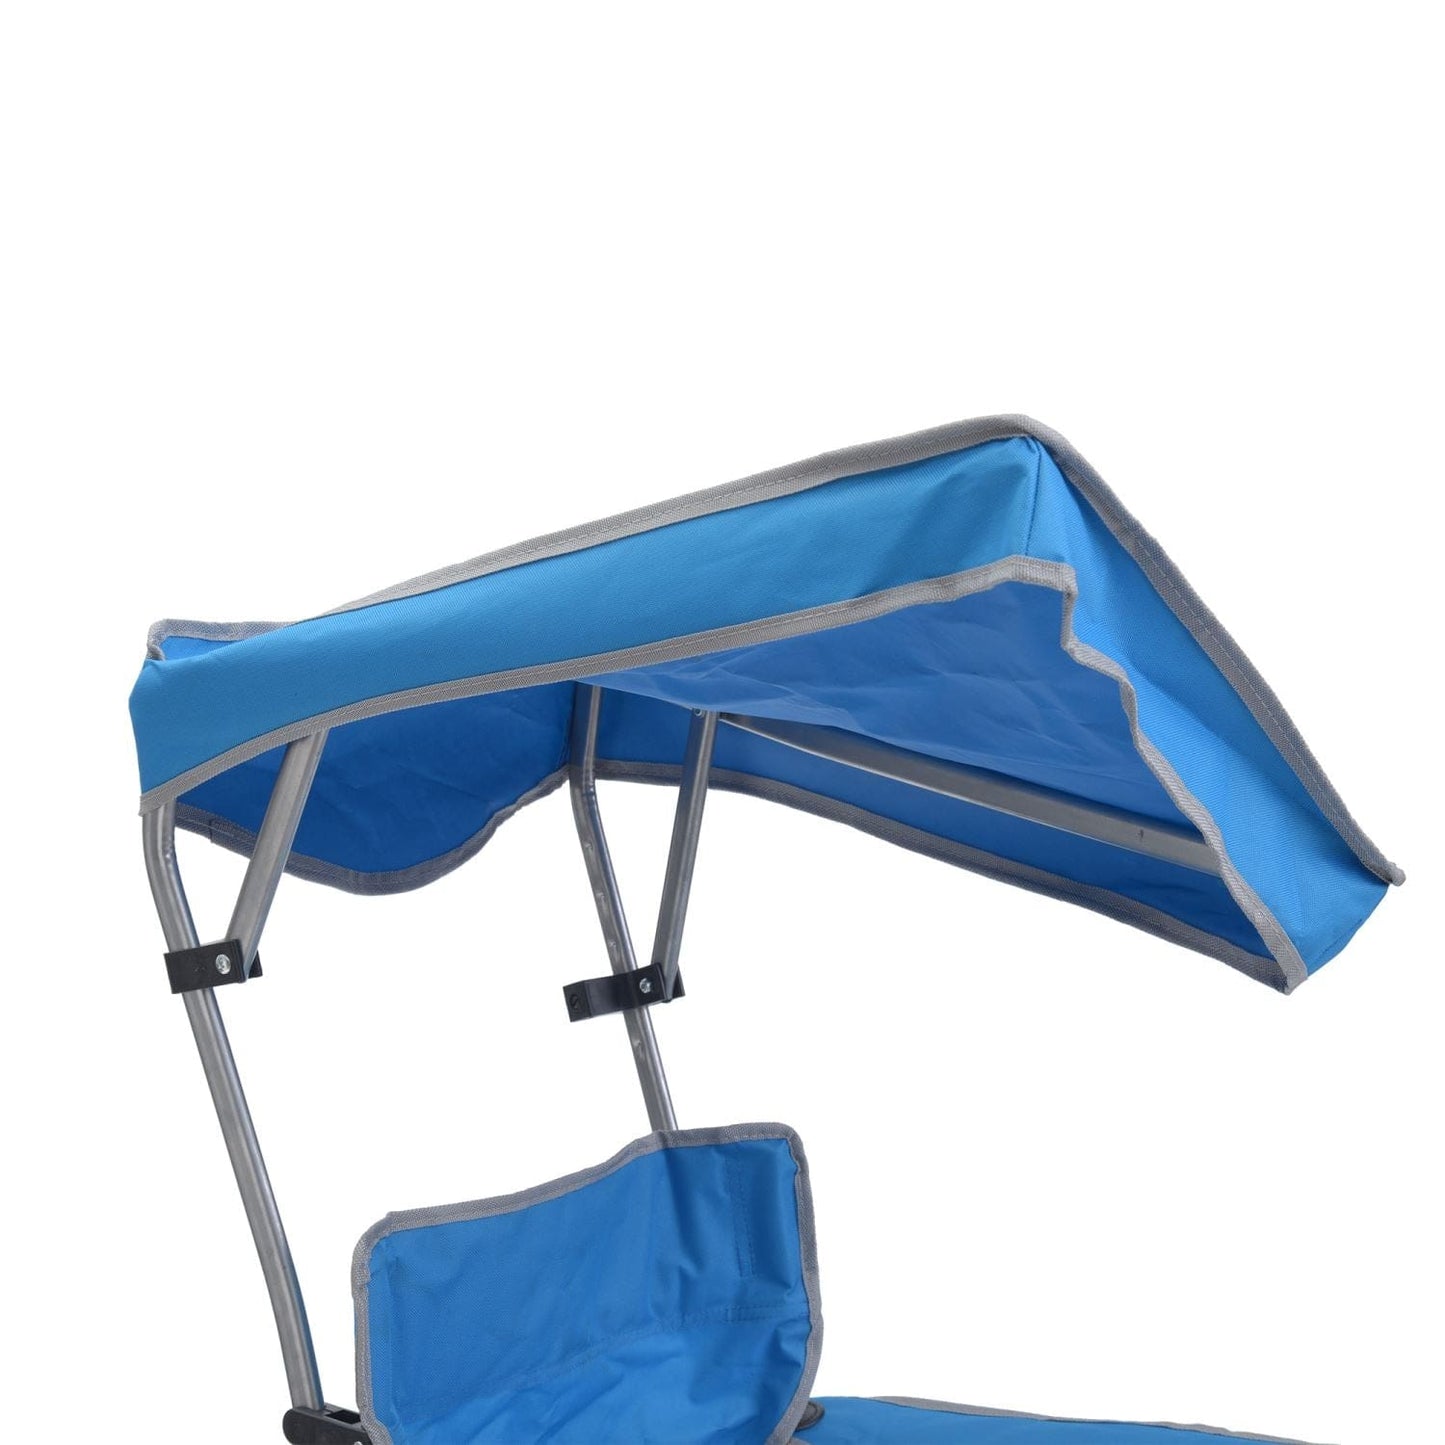 Quik Shade Portable Chairs Quik Shade | Kids Shade Folding Chair - Blue/Silver 161885DS